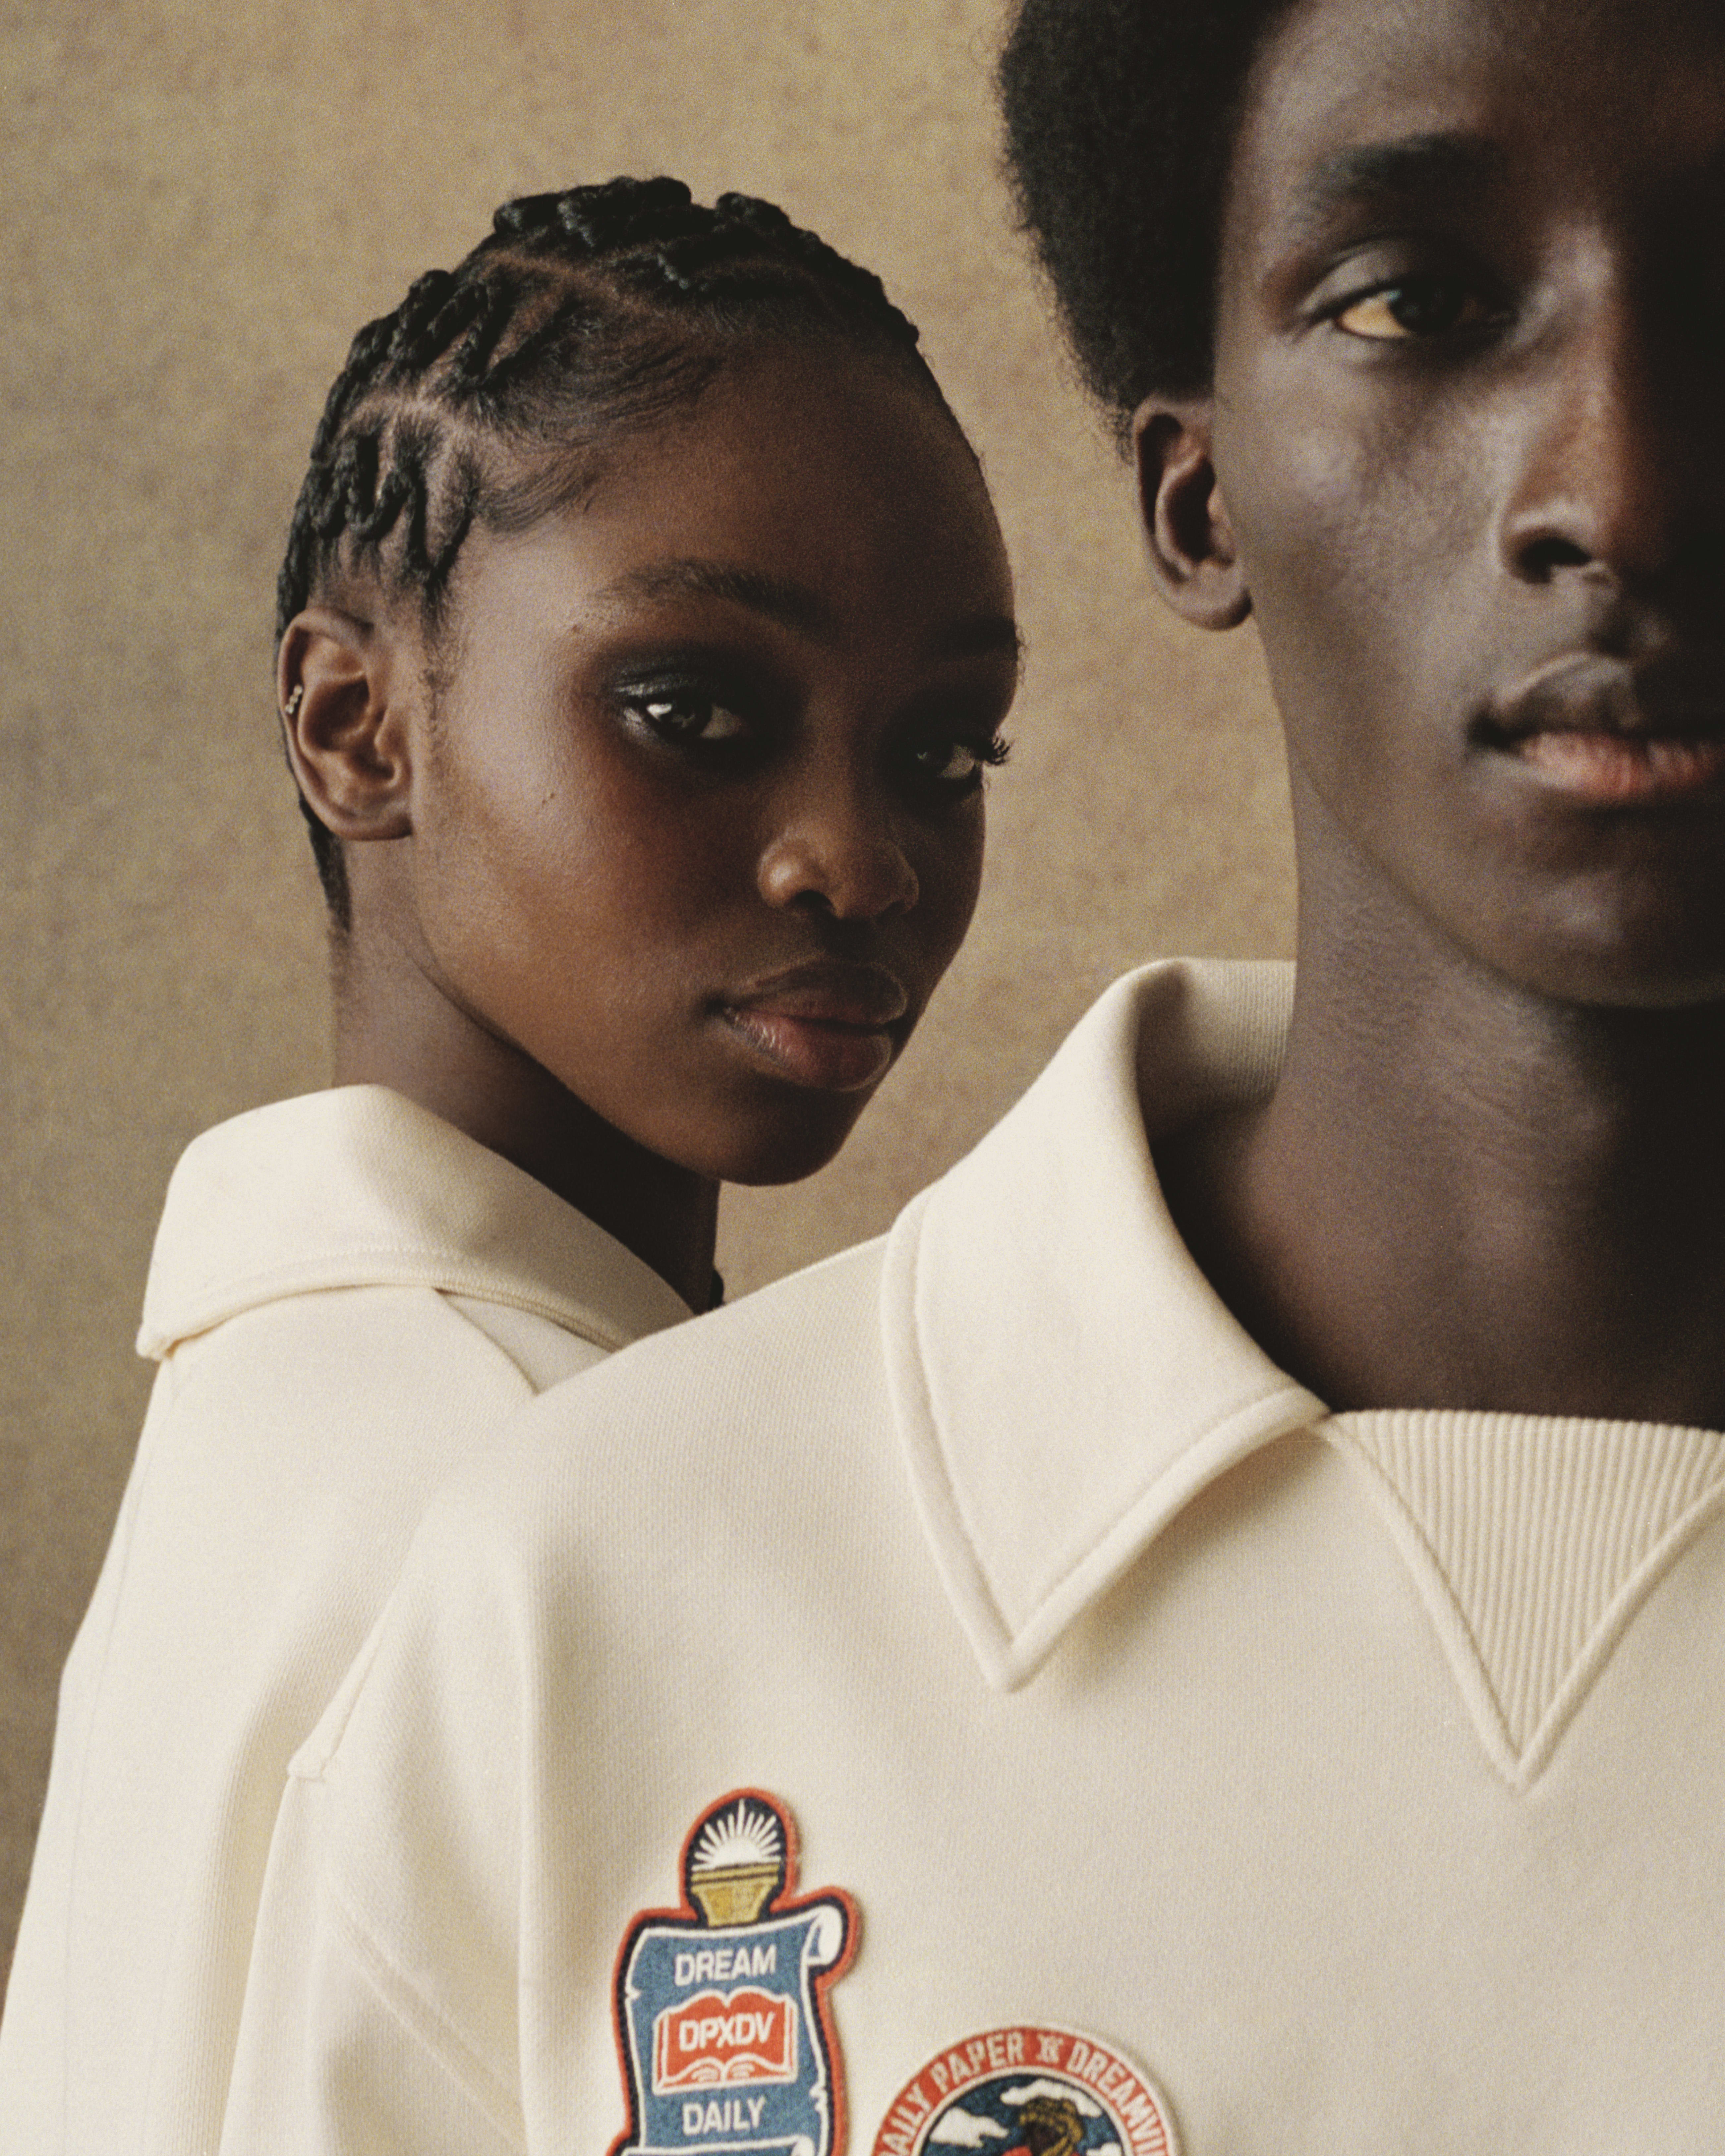 Models in new Dreamville campaign